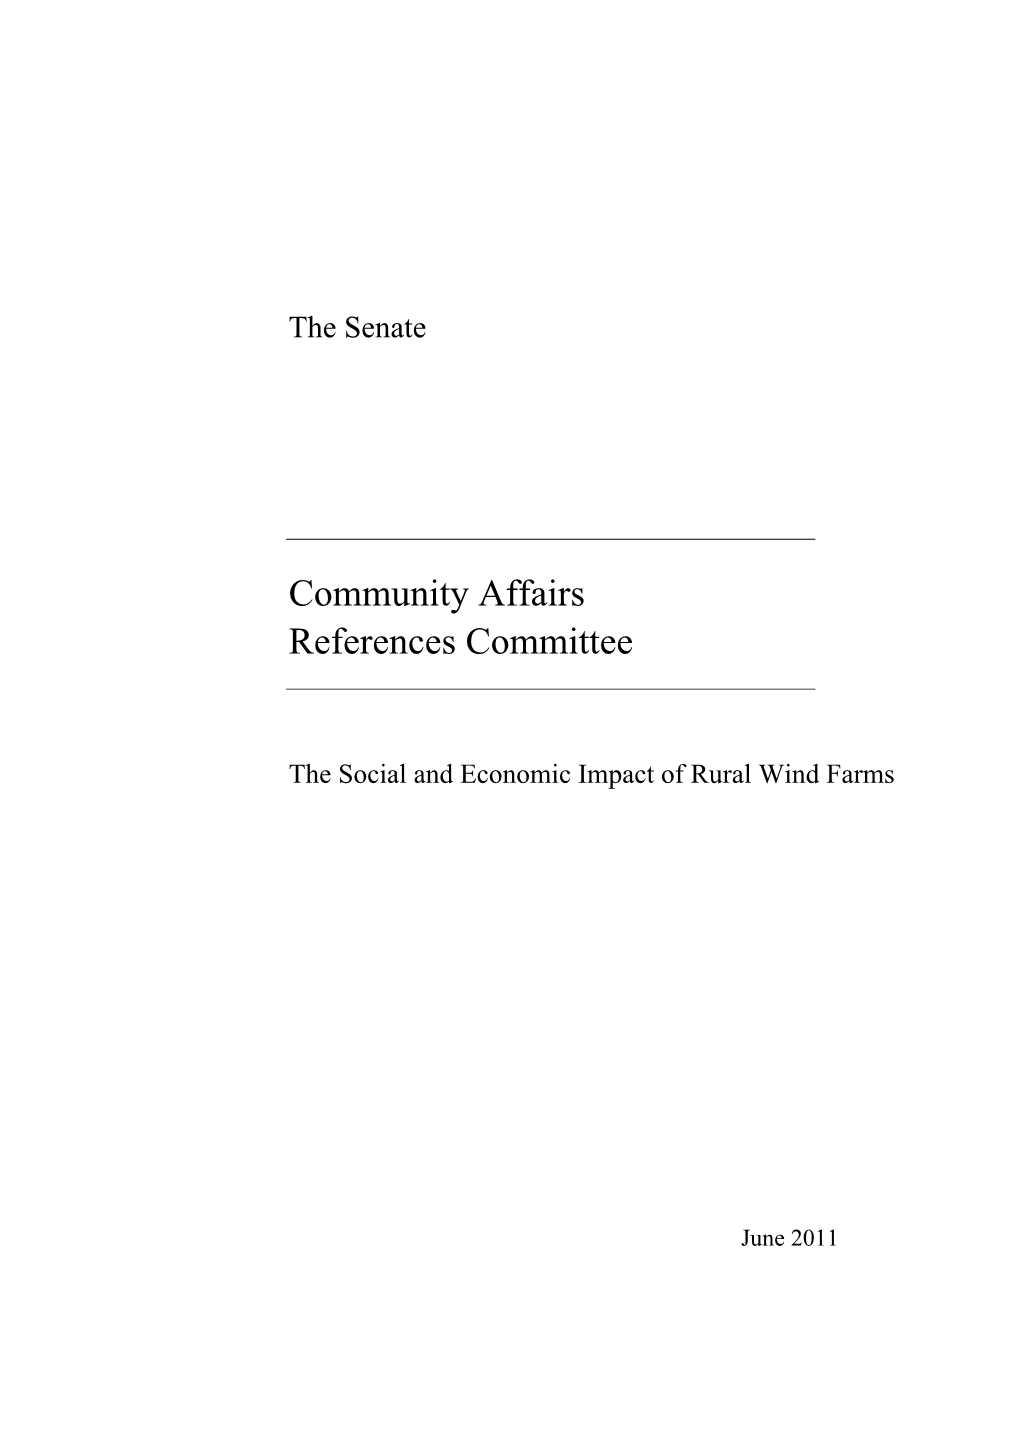 Report: the Social and Economic Impact of Rural Wind Farms